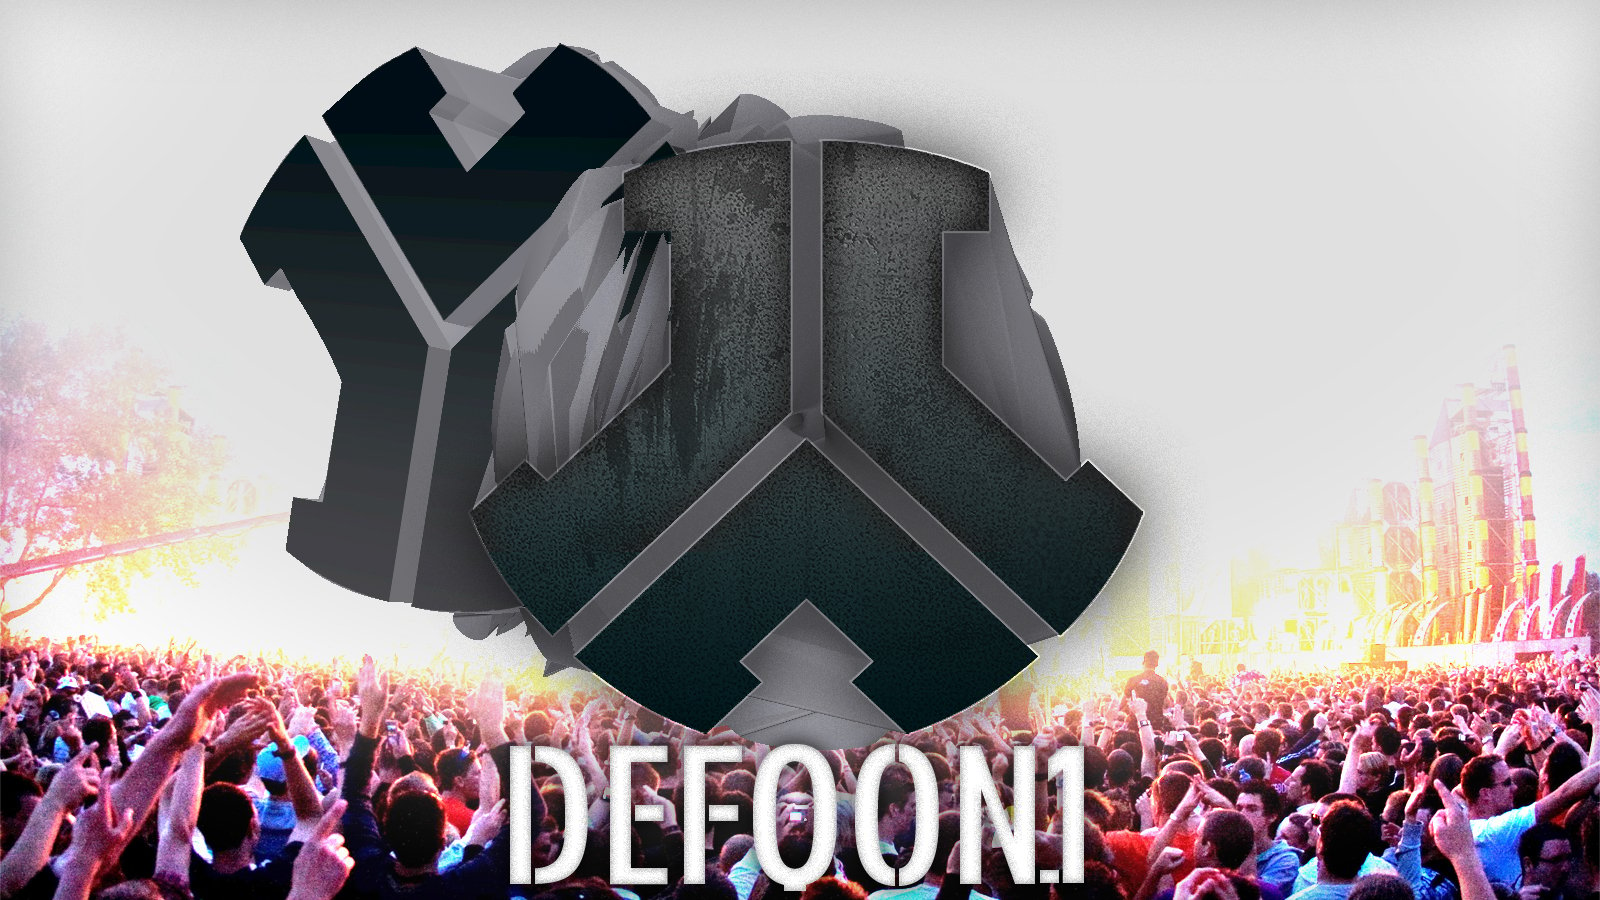 Defqon1 Wallpaper by NyDXlil on